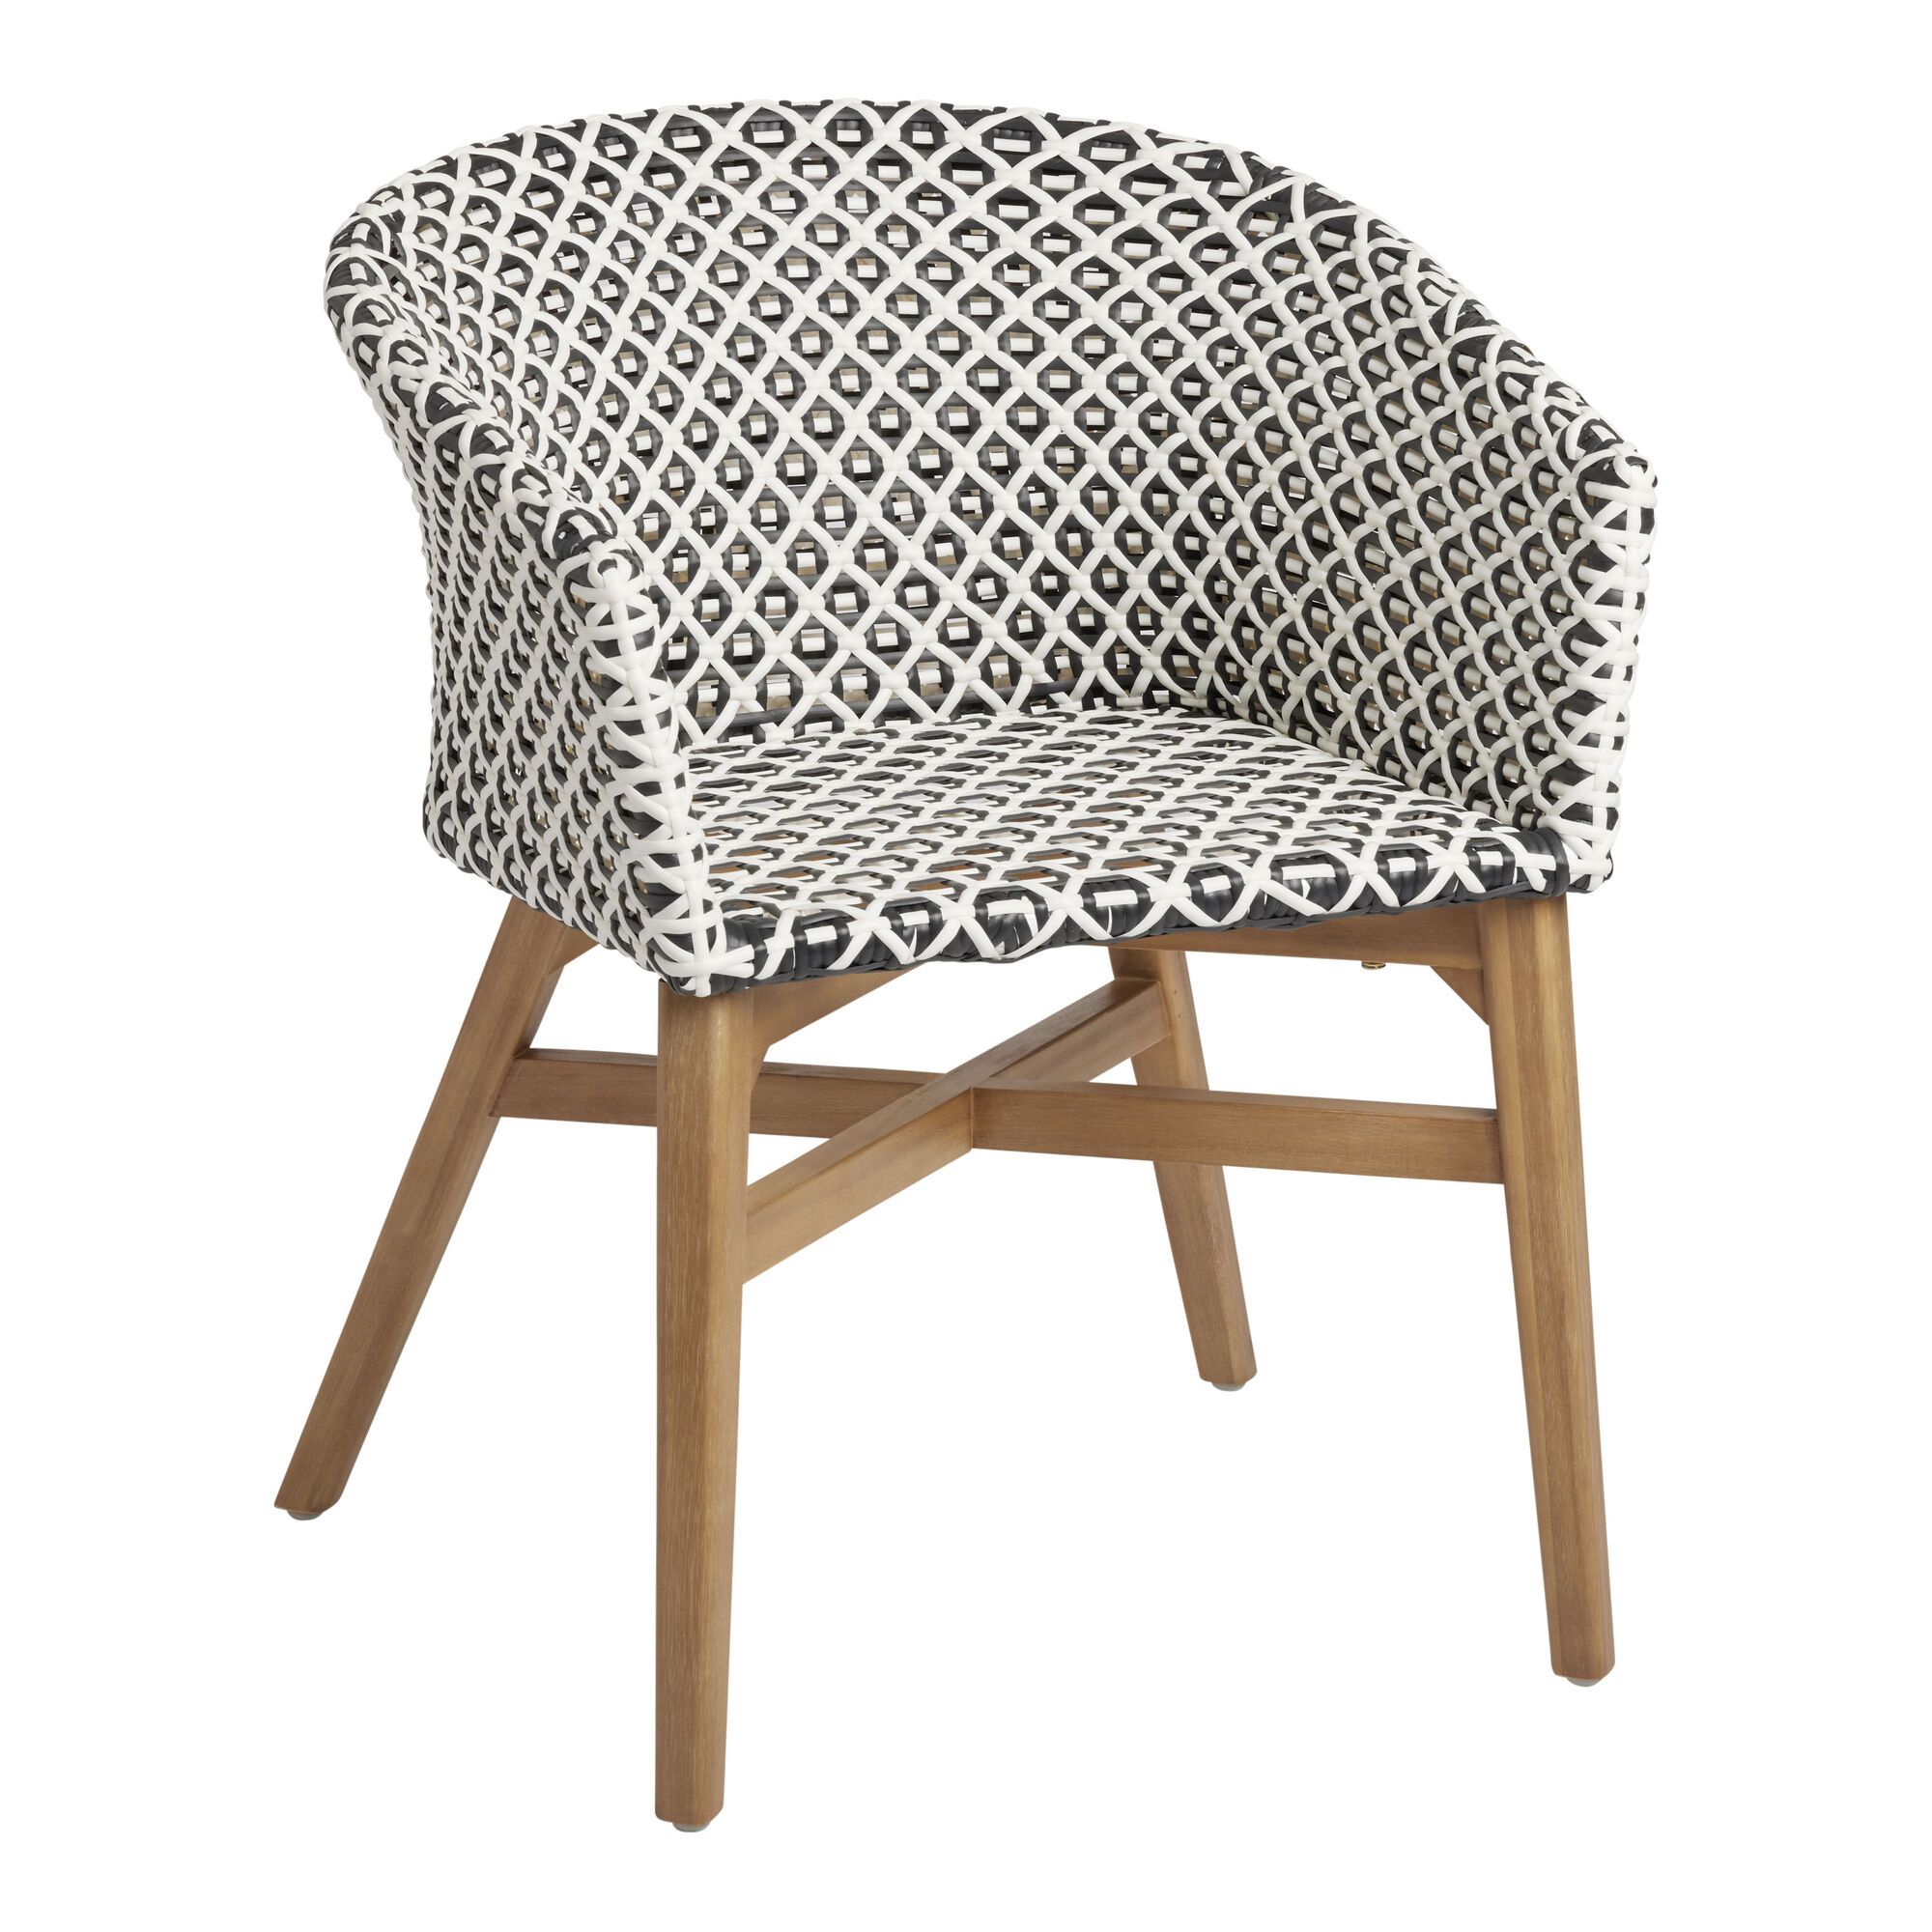 Calabria All Weather Wicker Outdoor Dining Chair | World Market